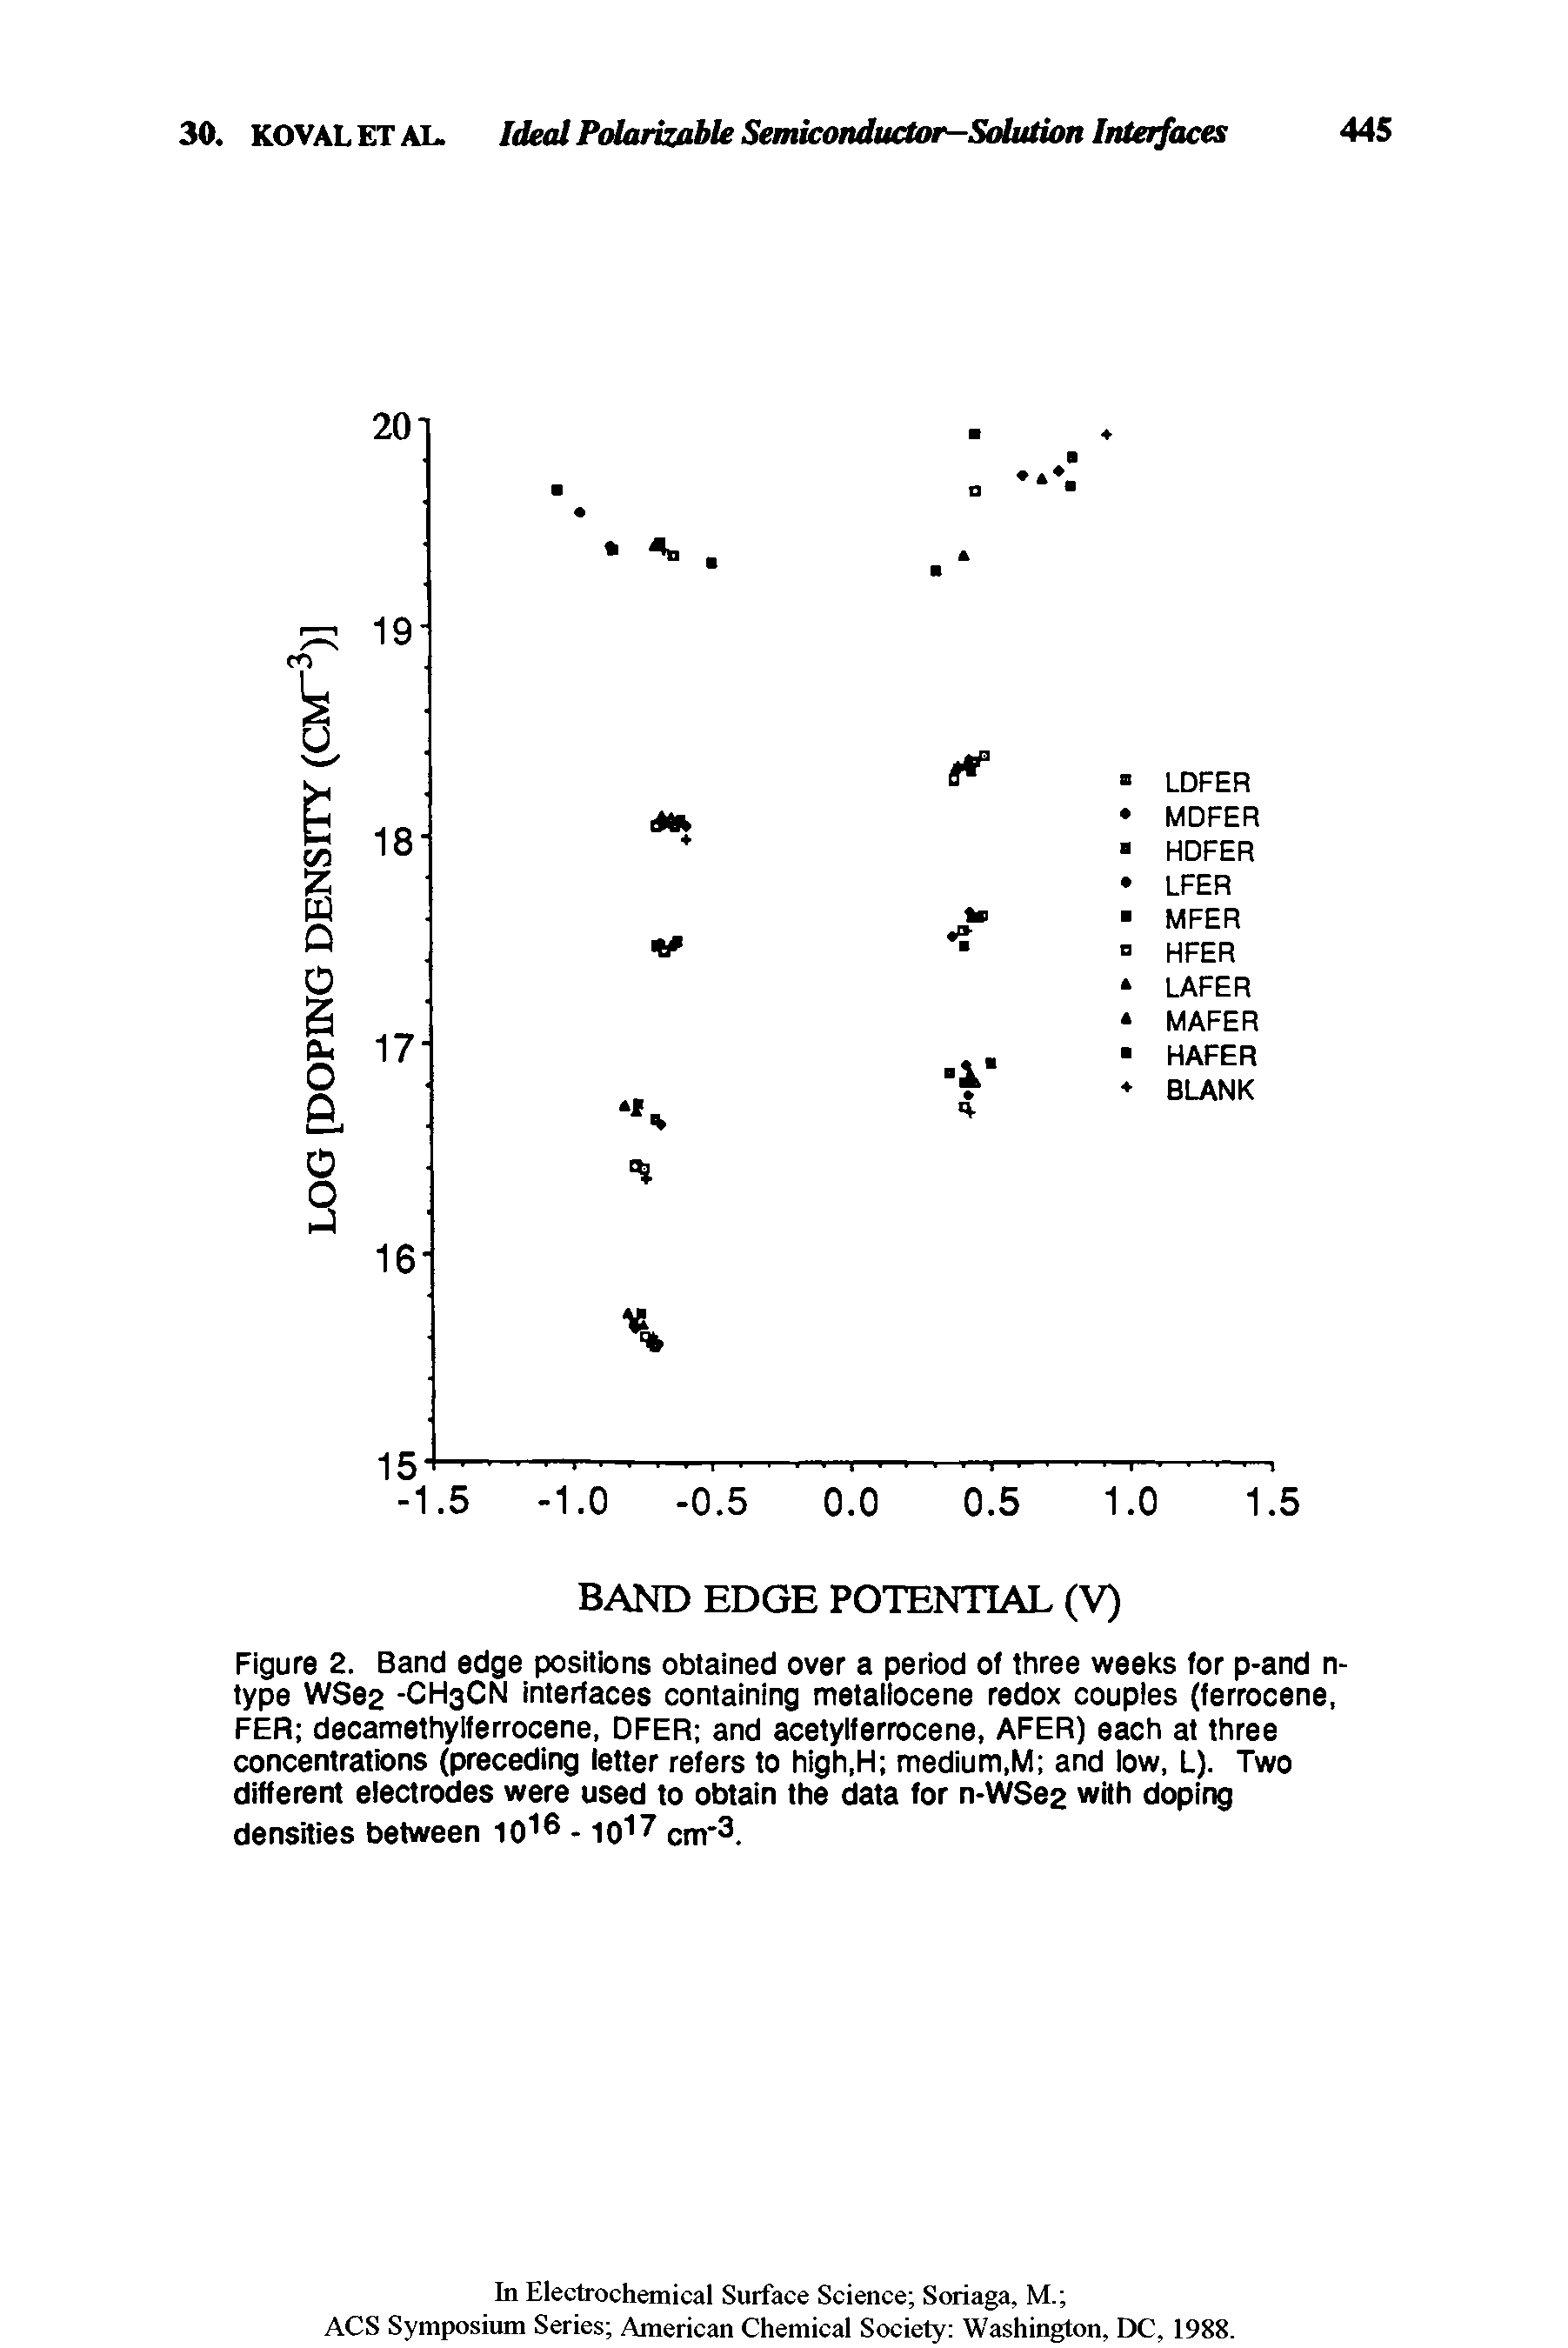 Figure 2. Band edge positions obtained over a period of three weeks for p-and n-type WSe2 -CH3CN interfaces containing metallocene redox couples (ferrocene, FER decamethylferrocene, DFER and acetylferrocene, AFER) each at three concentrations (preceding letter refers to high.H medium,M and low, L). Two different electrodes were used to obtain the data for n-WSe2 with doping densities between 1016 -1017 cm-3.